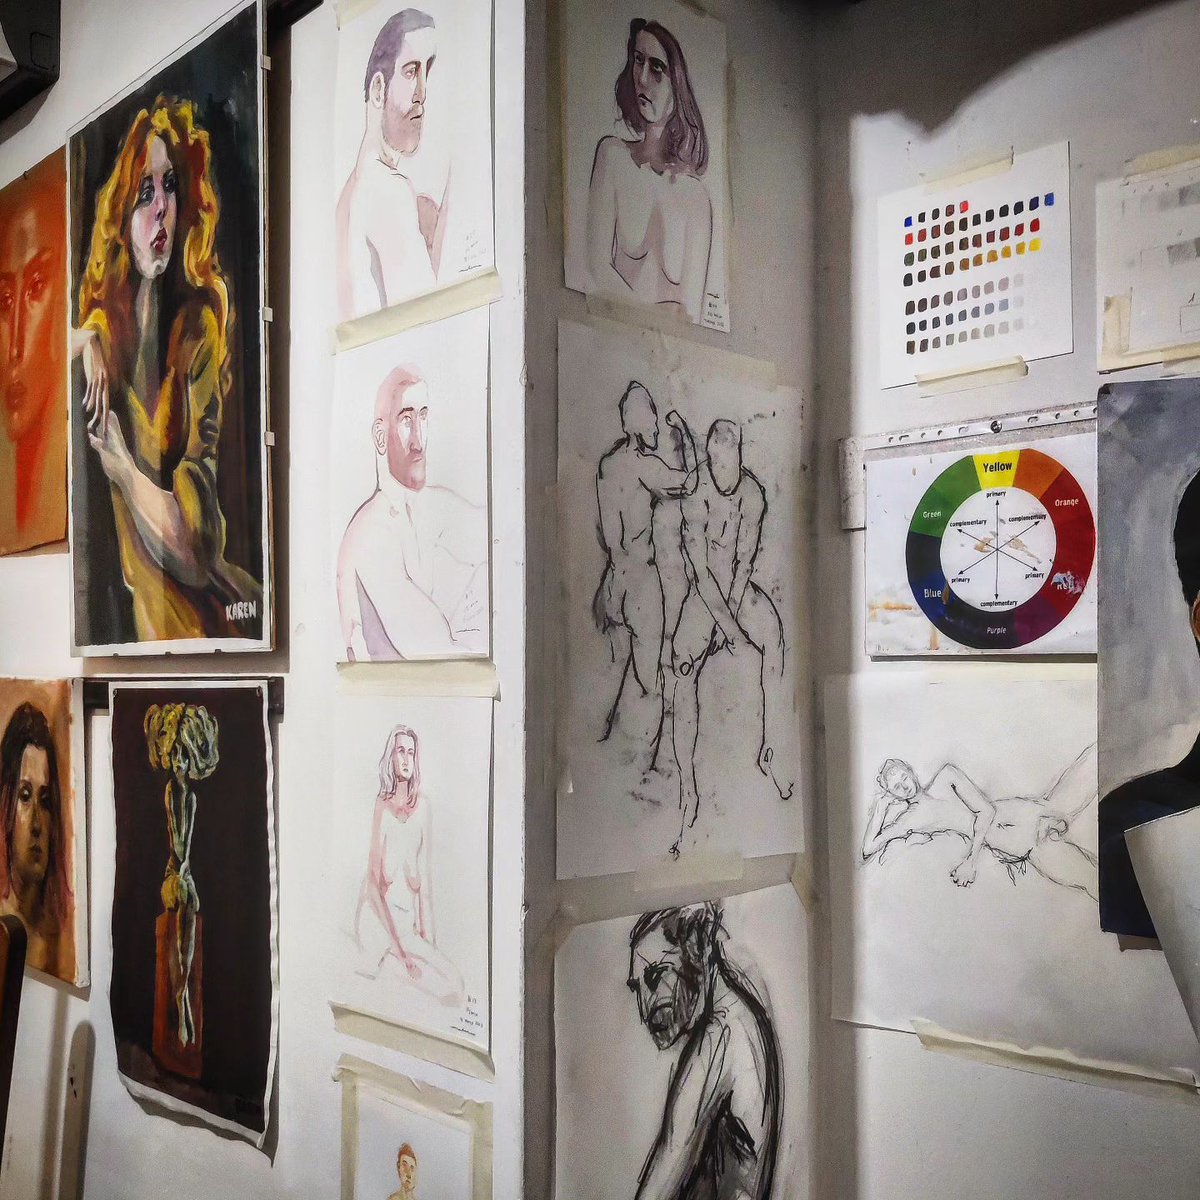 A corner of our life drawing room.
Life drawing classes take place every week all year round
#artlessons #artclass #adgartist #accademiadelgiglio #artworkshops #artworkshop #artacademy #artclasses #artcourse #artcourses #artschool #studyart #studyinitaly #studyinflorence